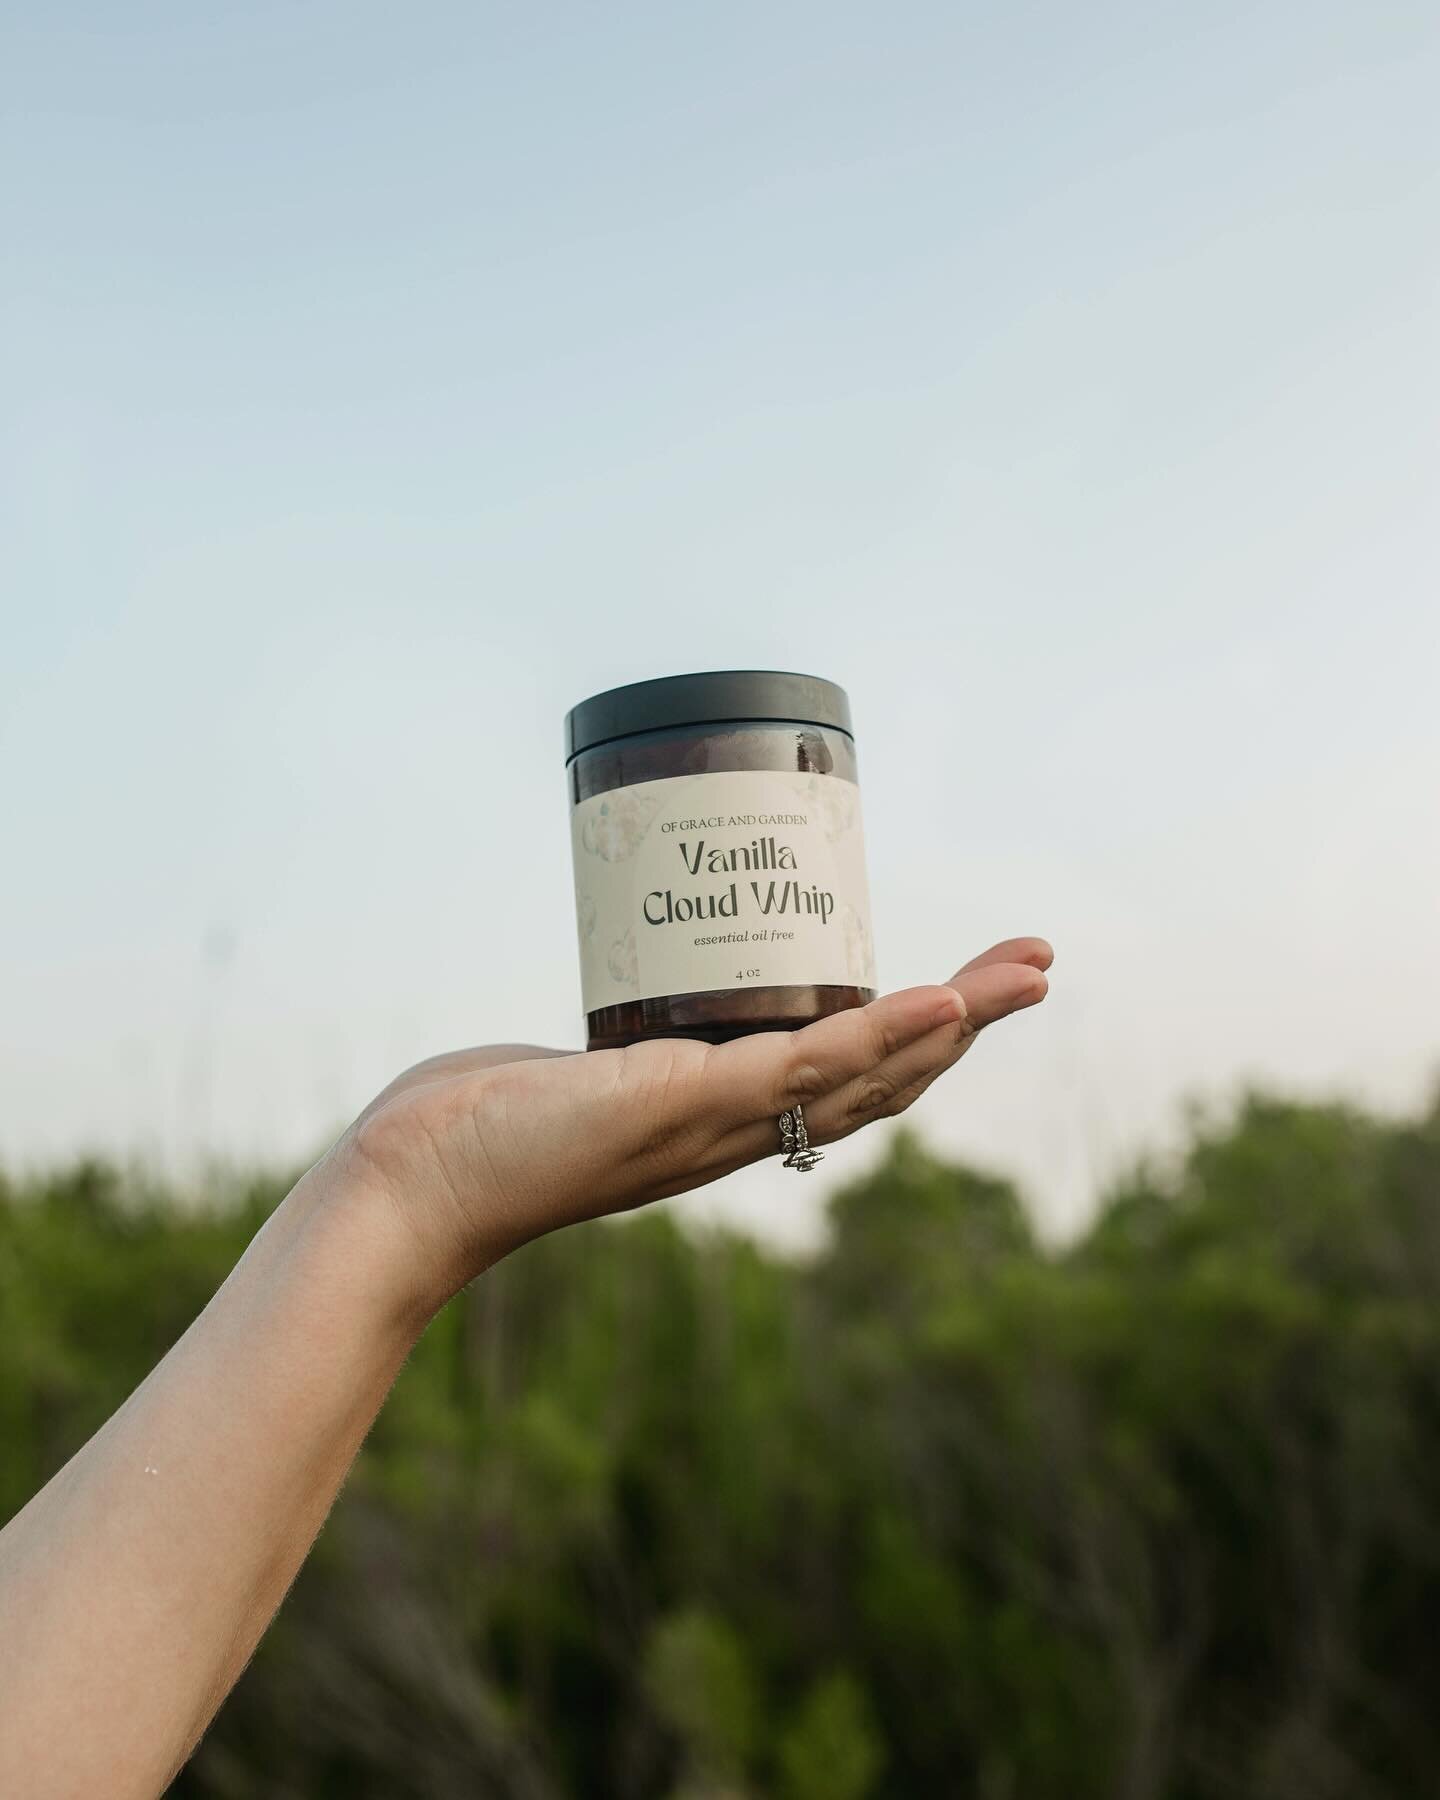 That feeling when you use vanilla cloud as your evening skincare and you get an instant serotonin boost. 🌥️💛

One more day until restock!